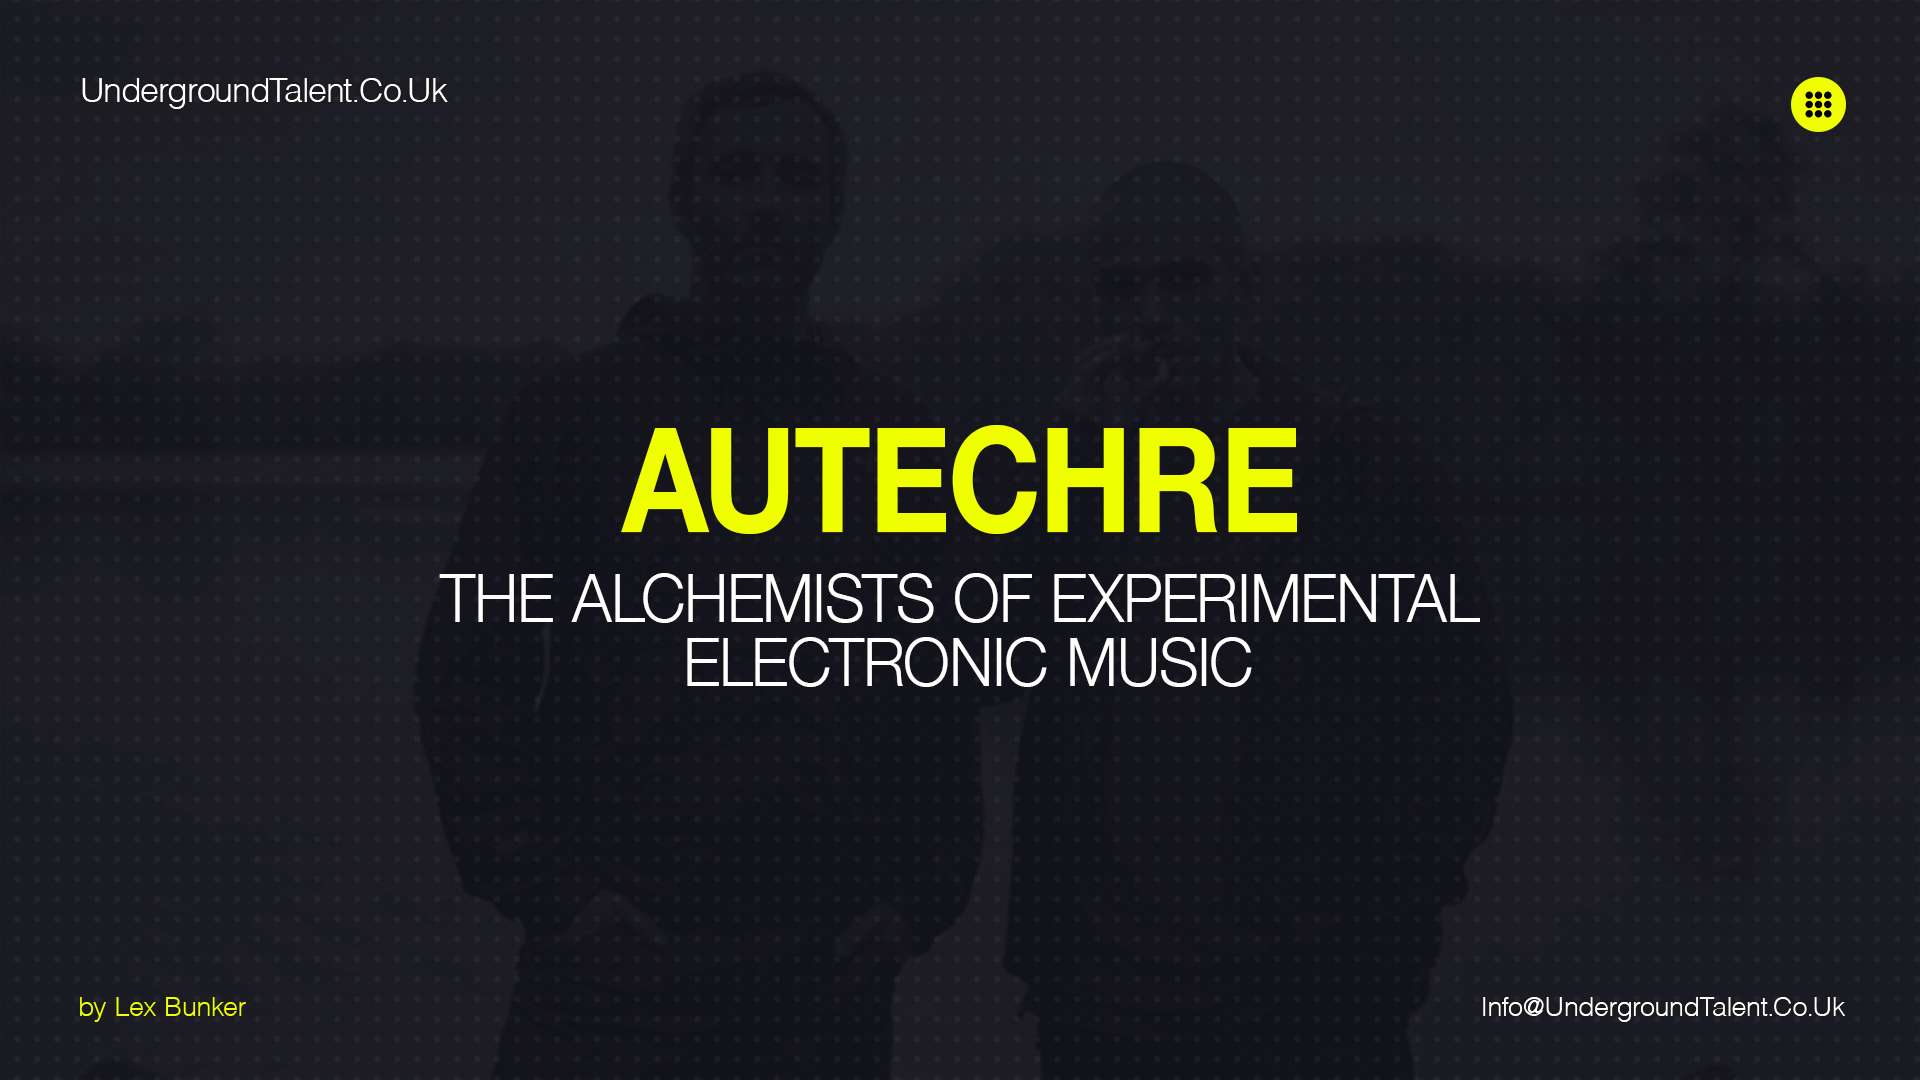 Autechre: The Alchemists of Experimental Electronic Music